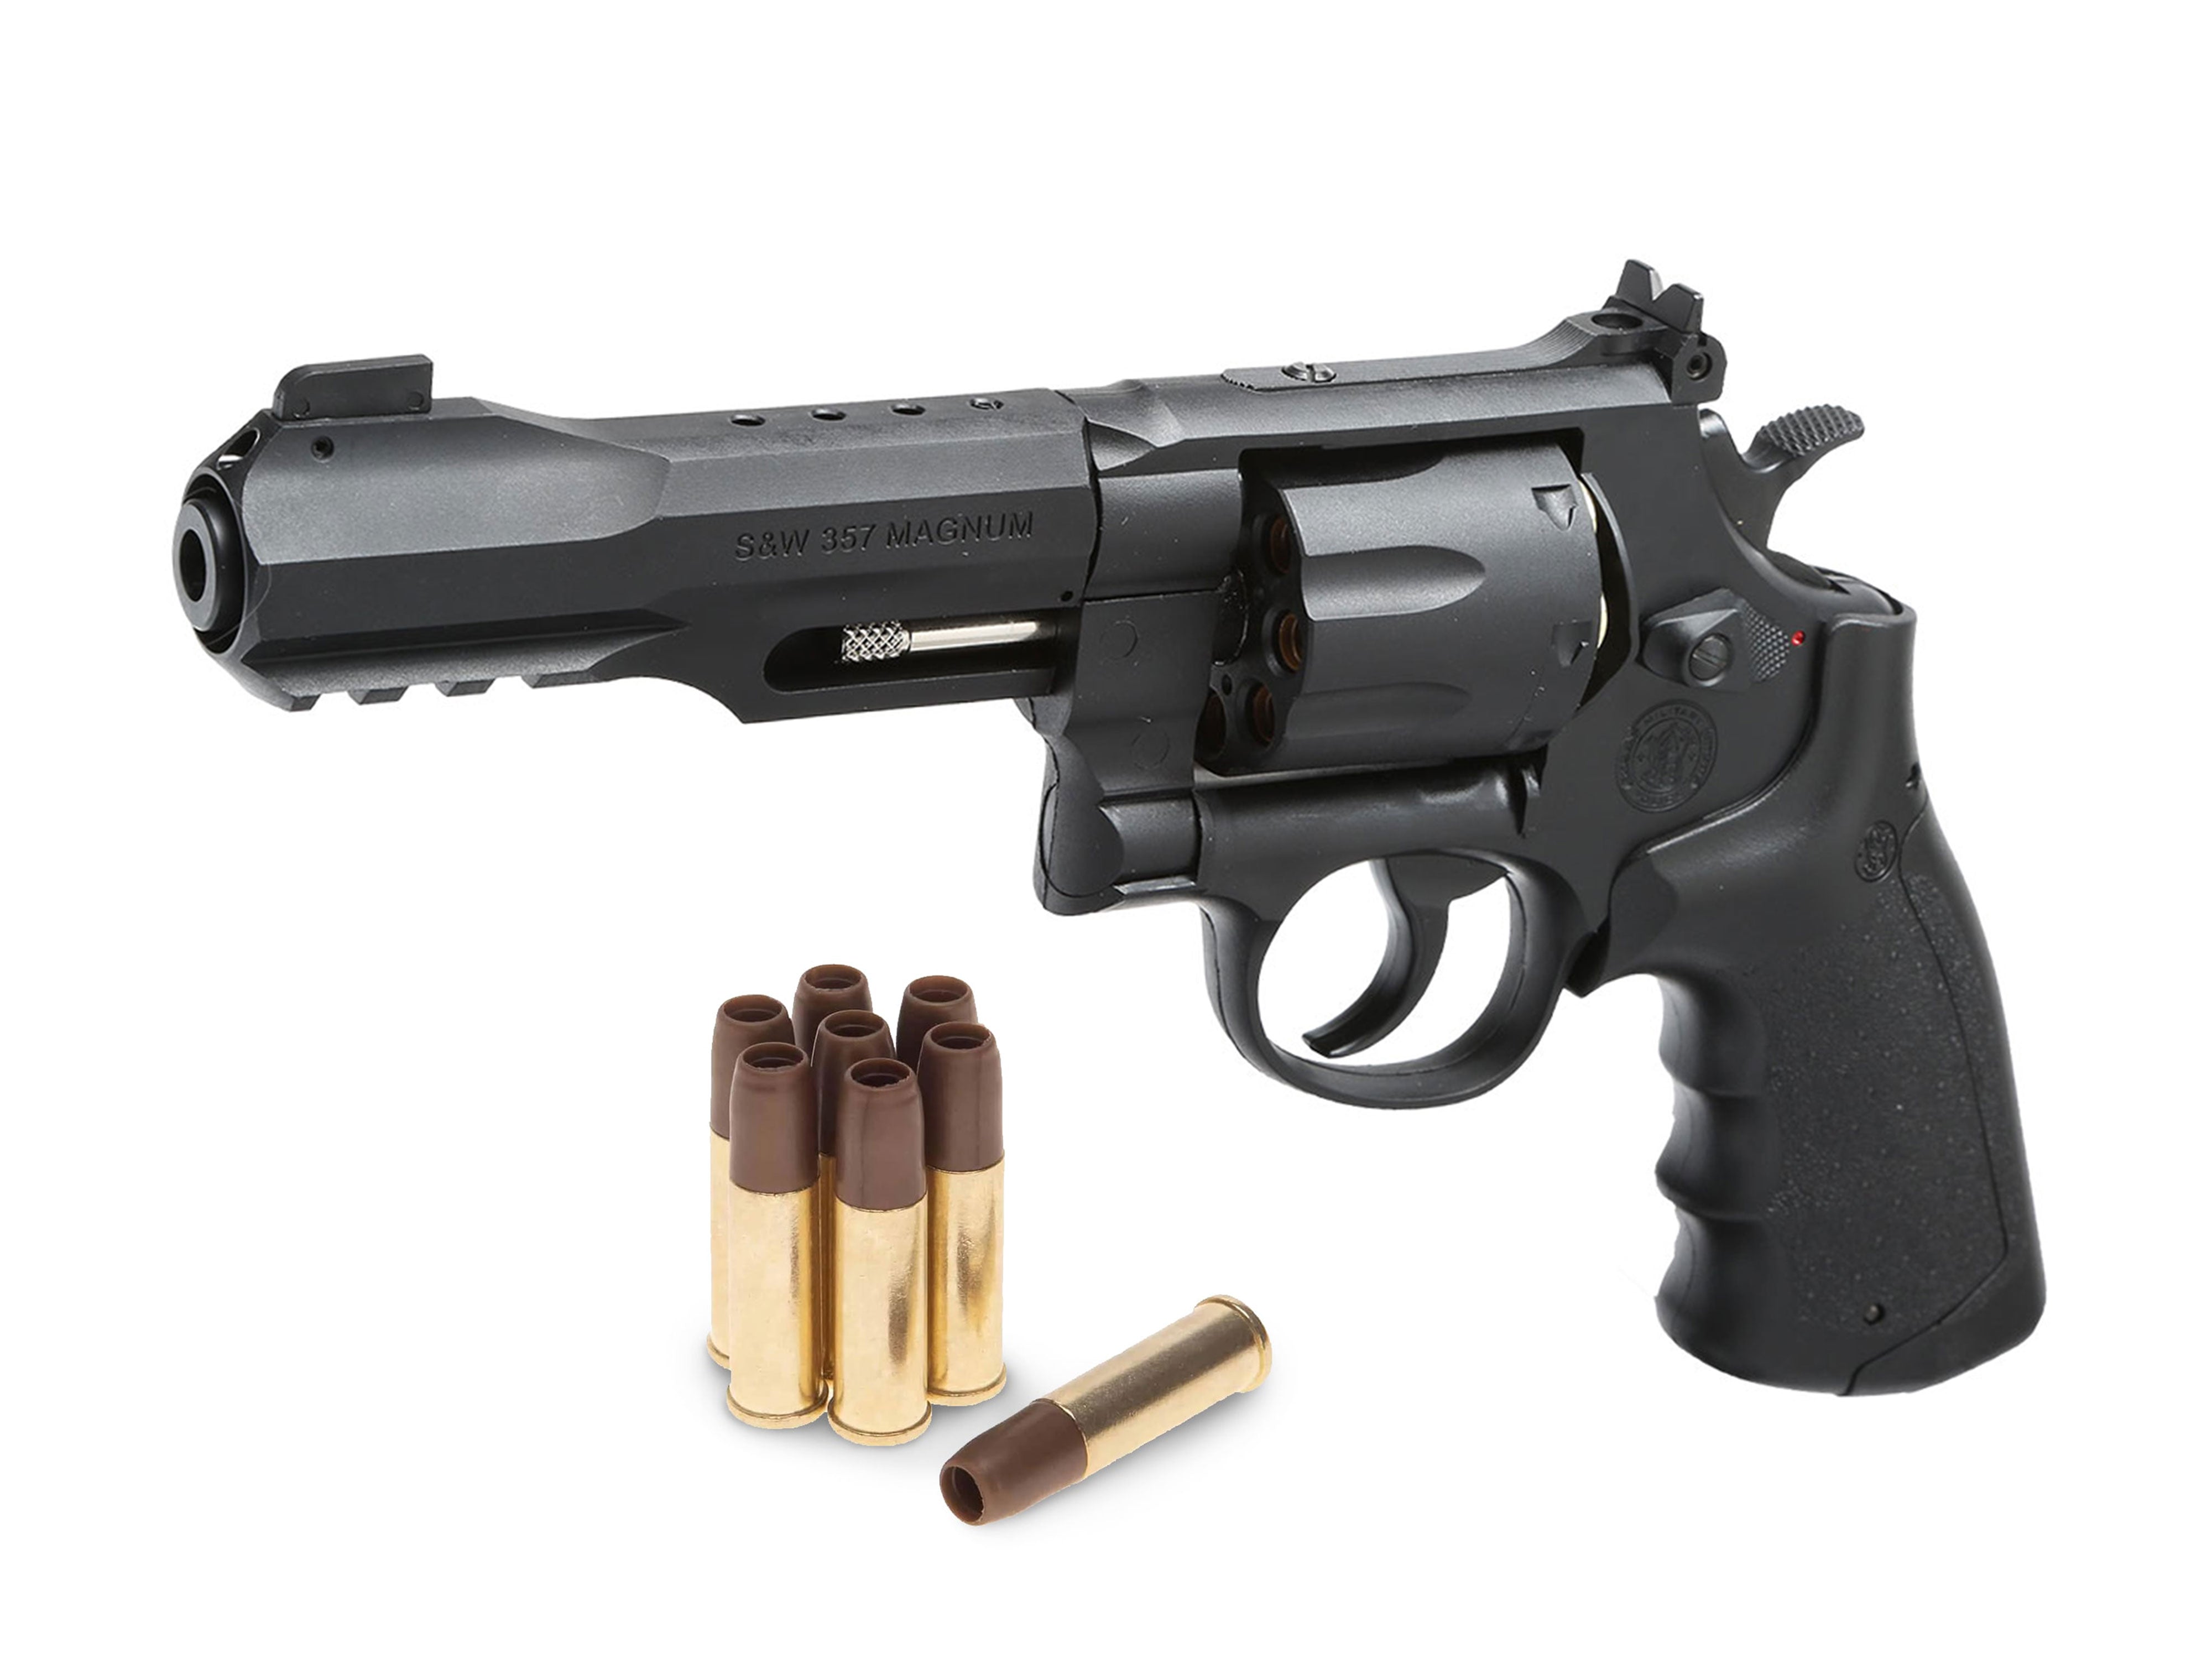 UMAREX | Smith & Wesson M&P R8 CO2ガスリボルバー. – GD6-JP